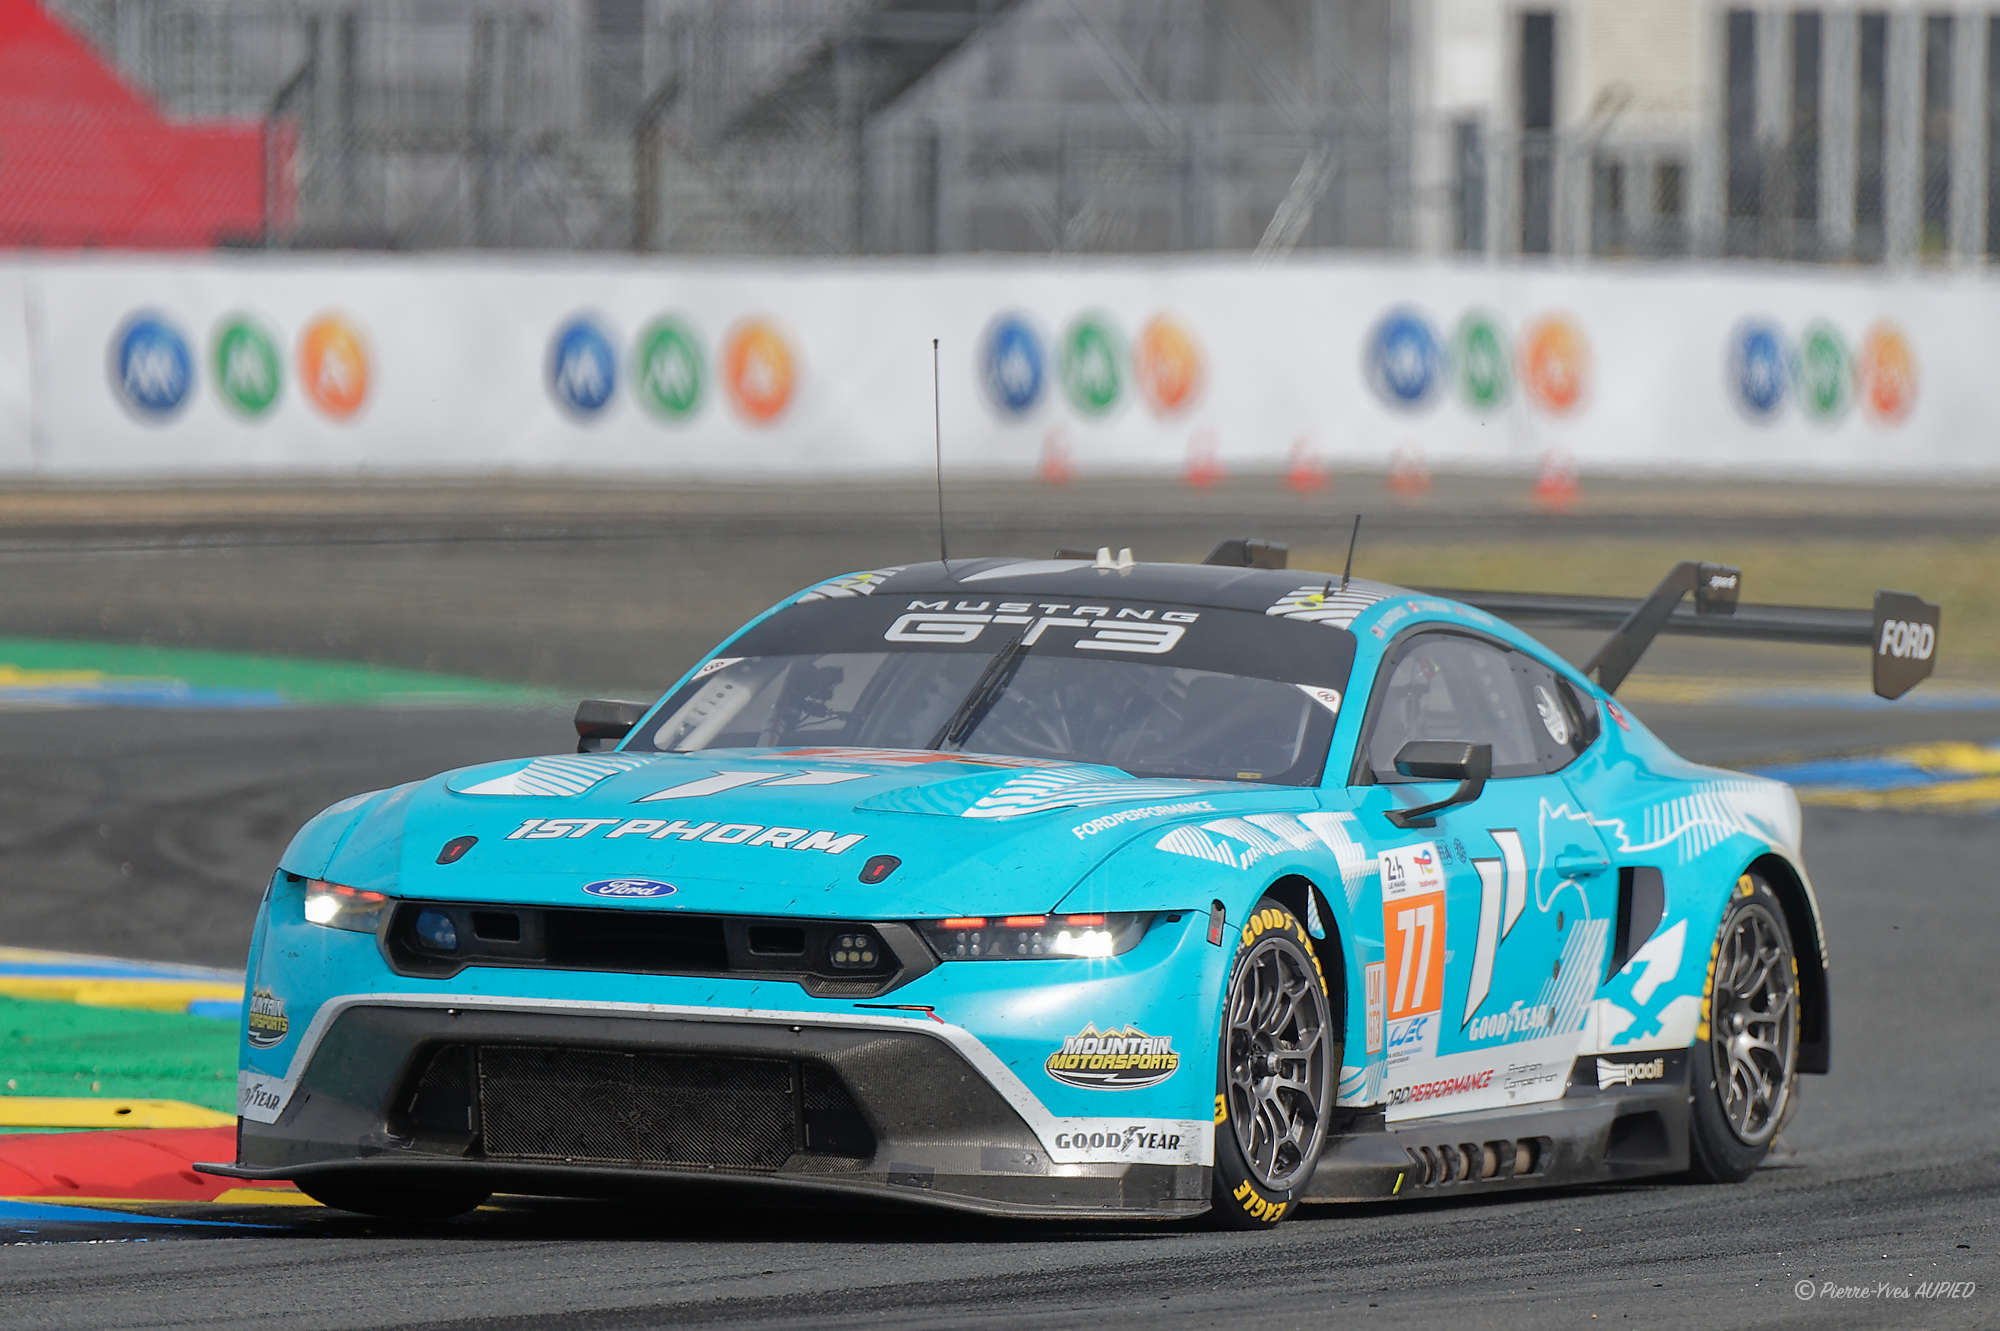 LeMans-2024 #77 Ford Mustang img3865